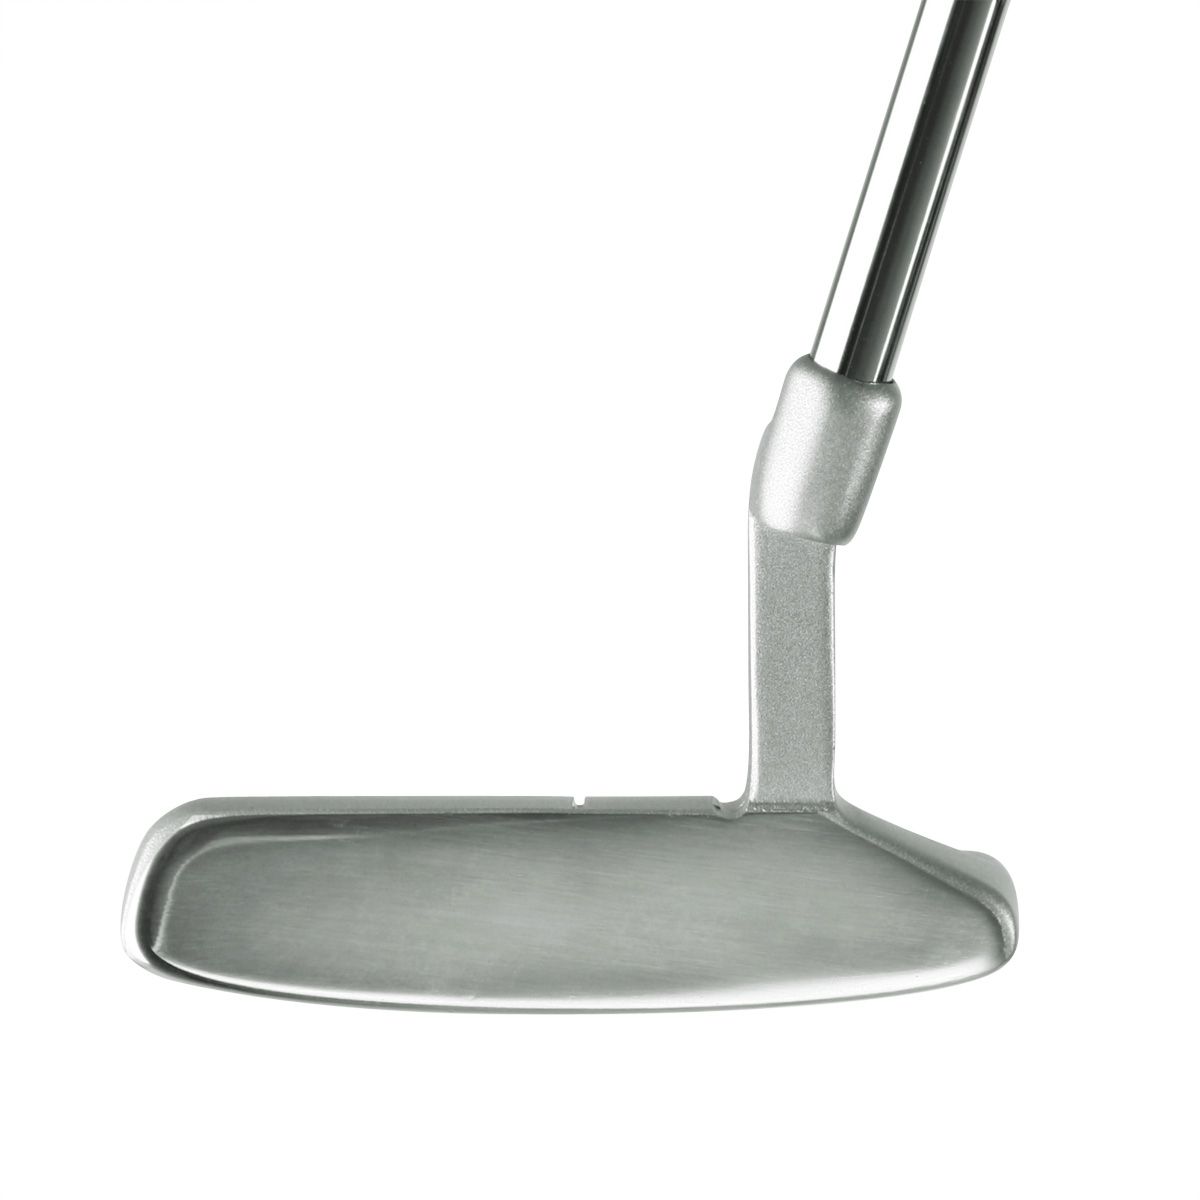 face view of the right handed Intech Future Tour Pee Wee Putter